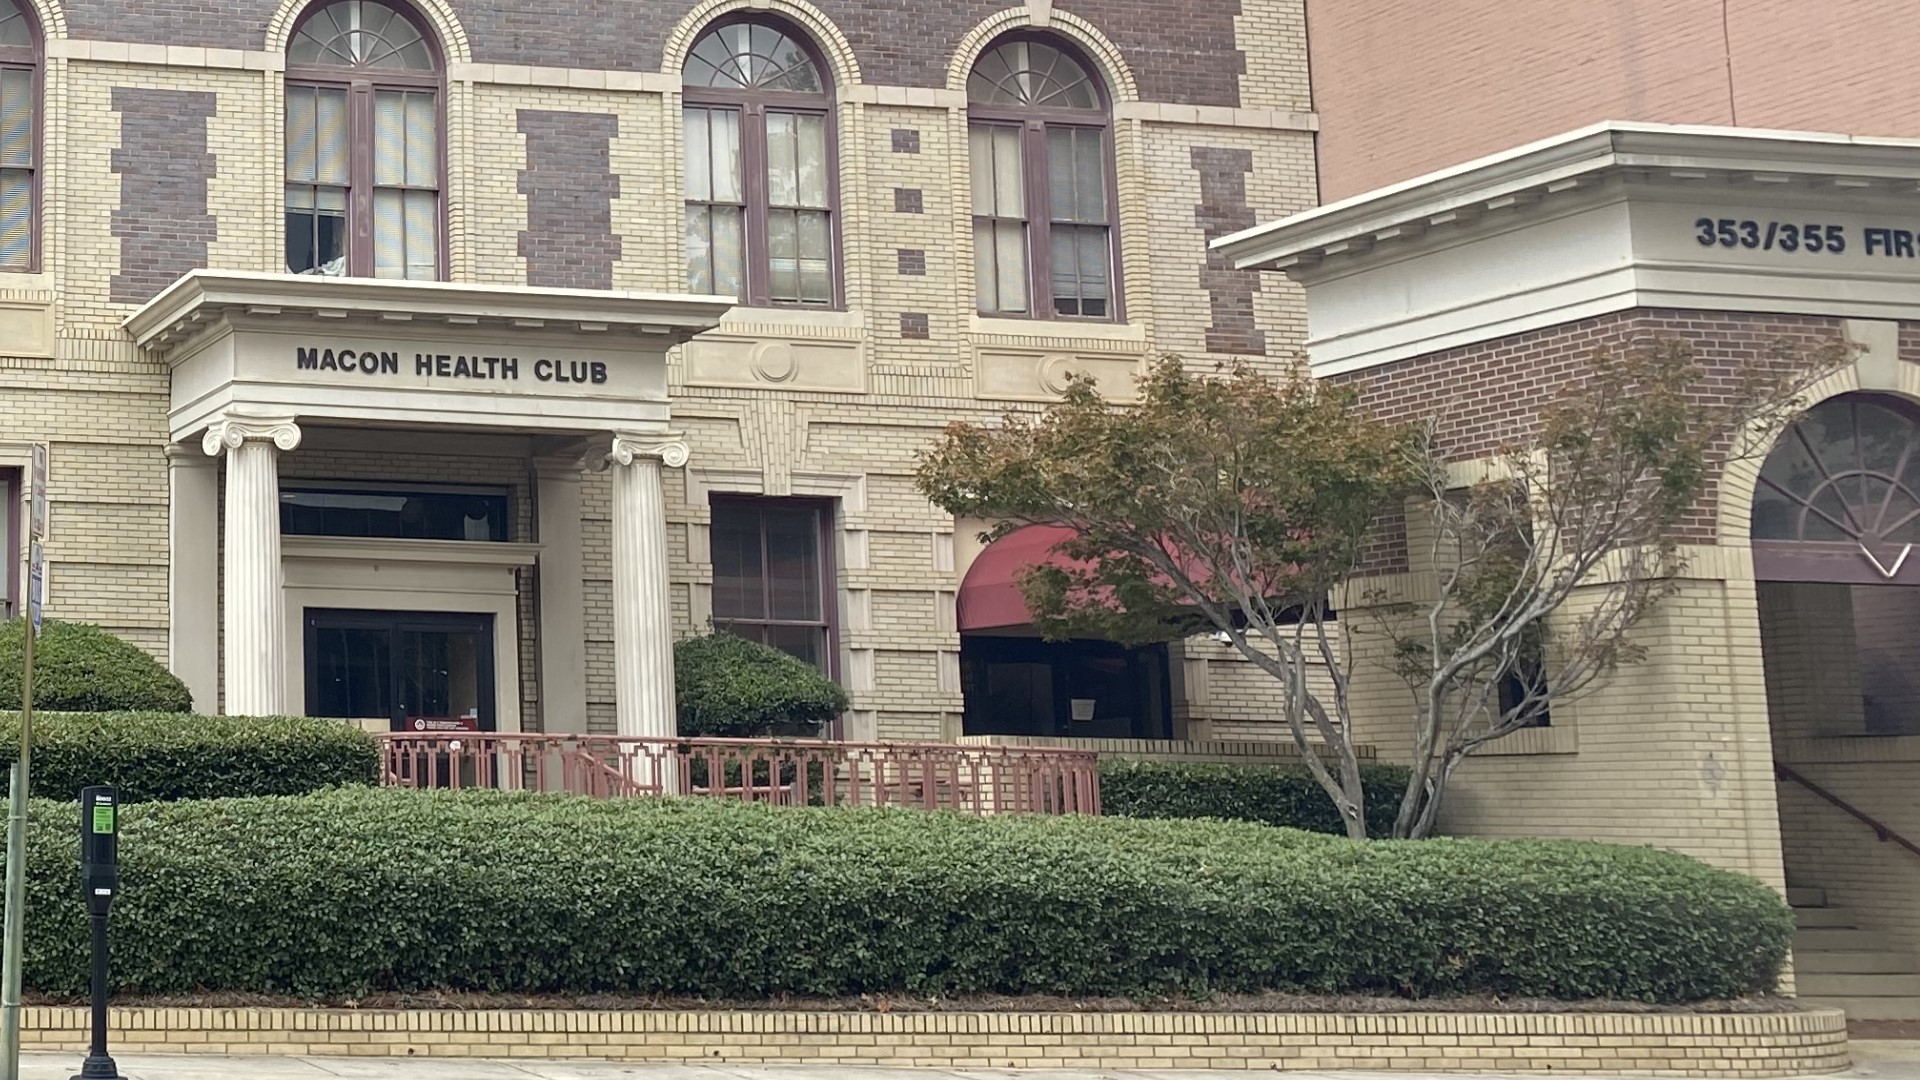 Mayor Lester Miller and the Urban Development Authority announced in a morning news conference that they acquired the old Macon Health Club.